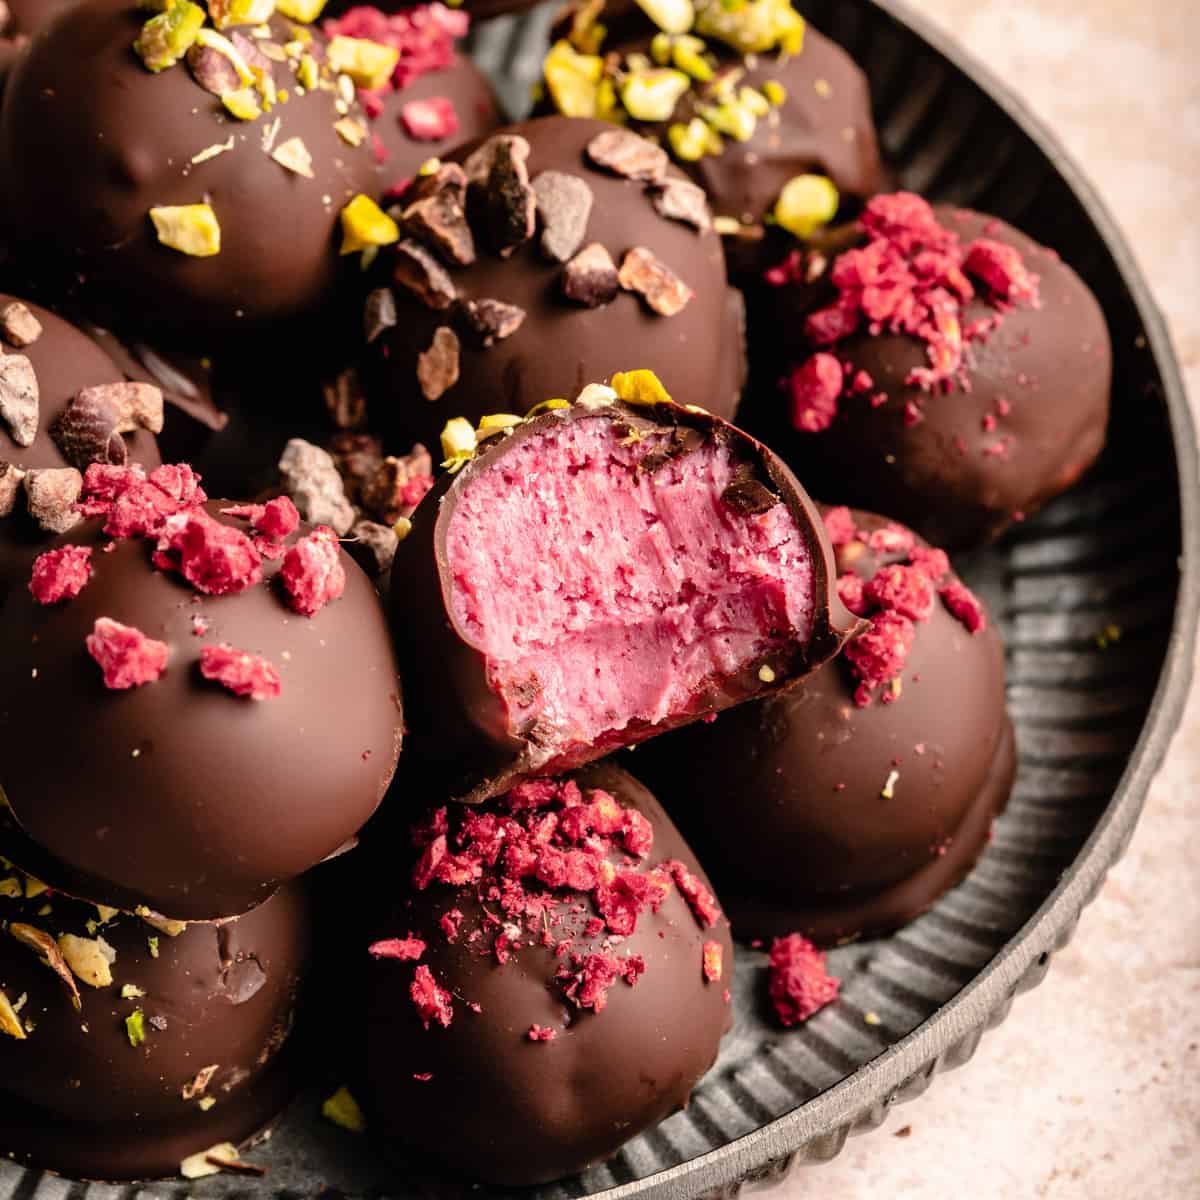 Plate of raspberry dark chocolate truffles with various toppings and one with a bite out.